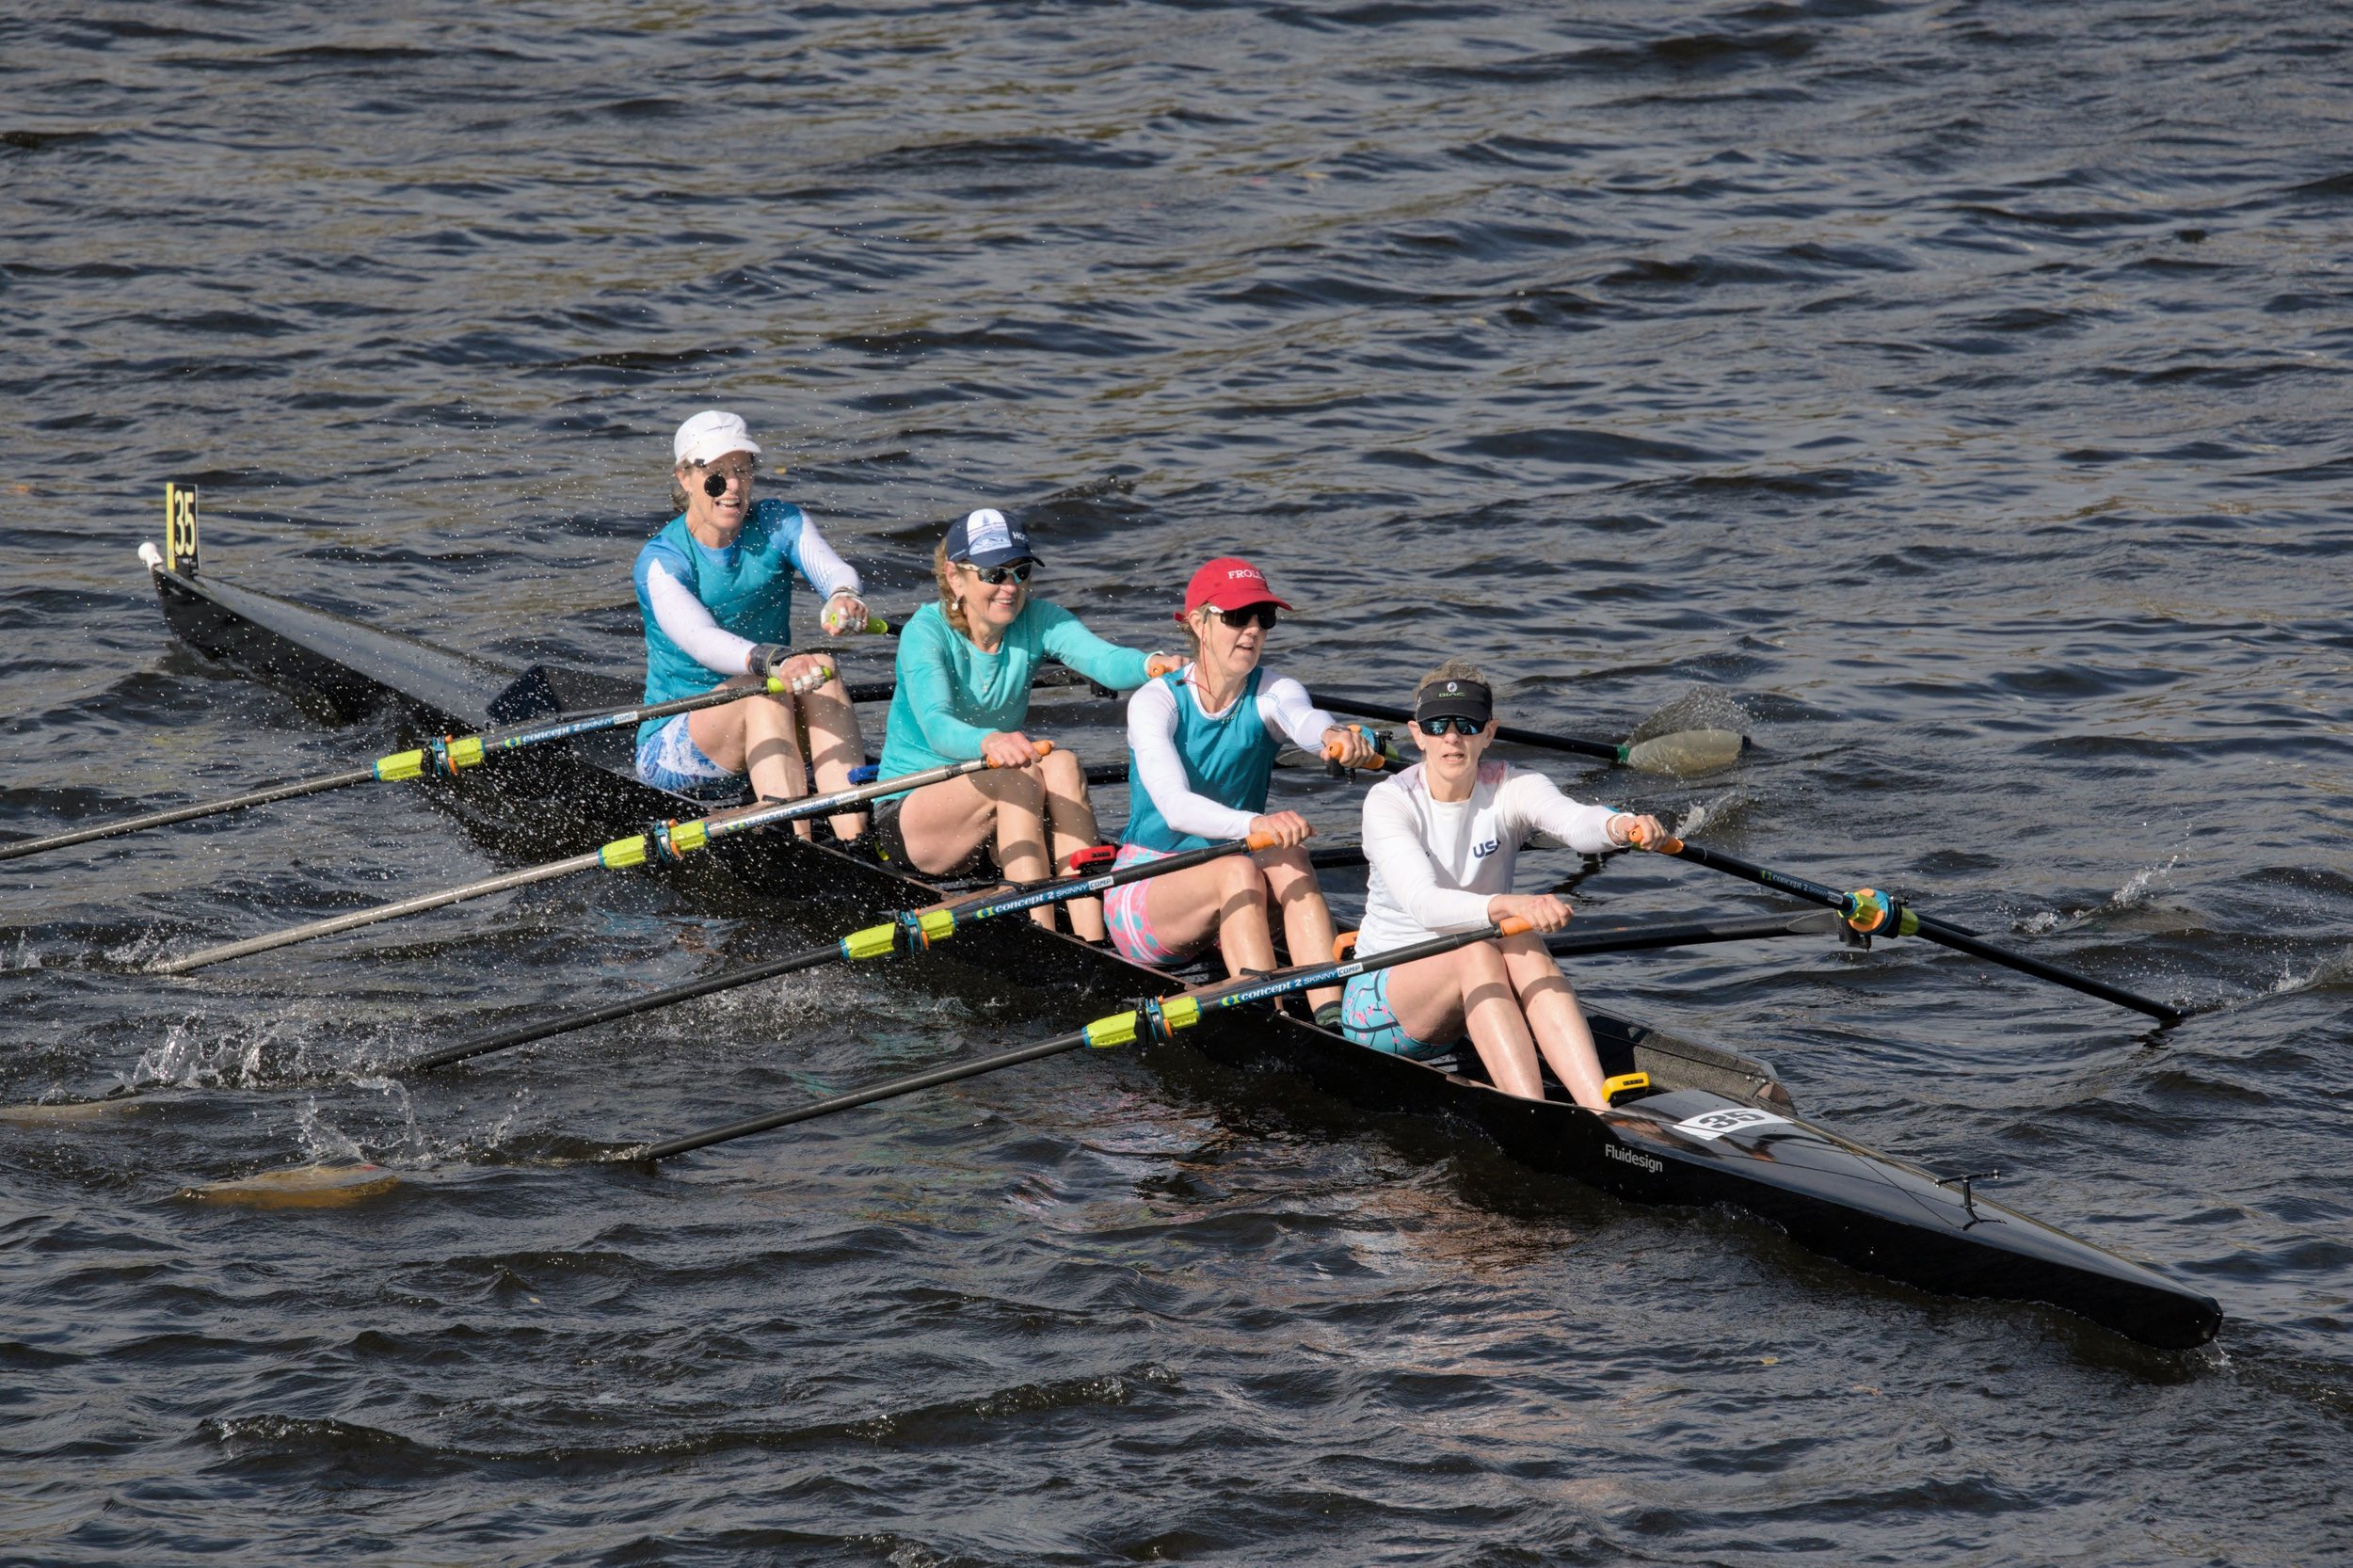  4x at the 2023 Head of the Charles regatta in Boston, MA. Sharon is stroking; 3-seat is her college roommate who lives in Maine; bow seat is 3-seat’s 2x partner; and 2-seat is Sharon’s 2x partner. The team finished mid-pack after only a few rows tog